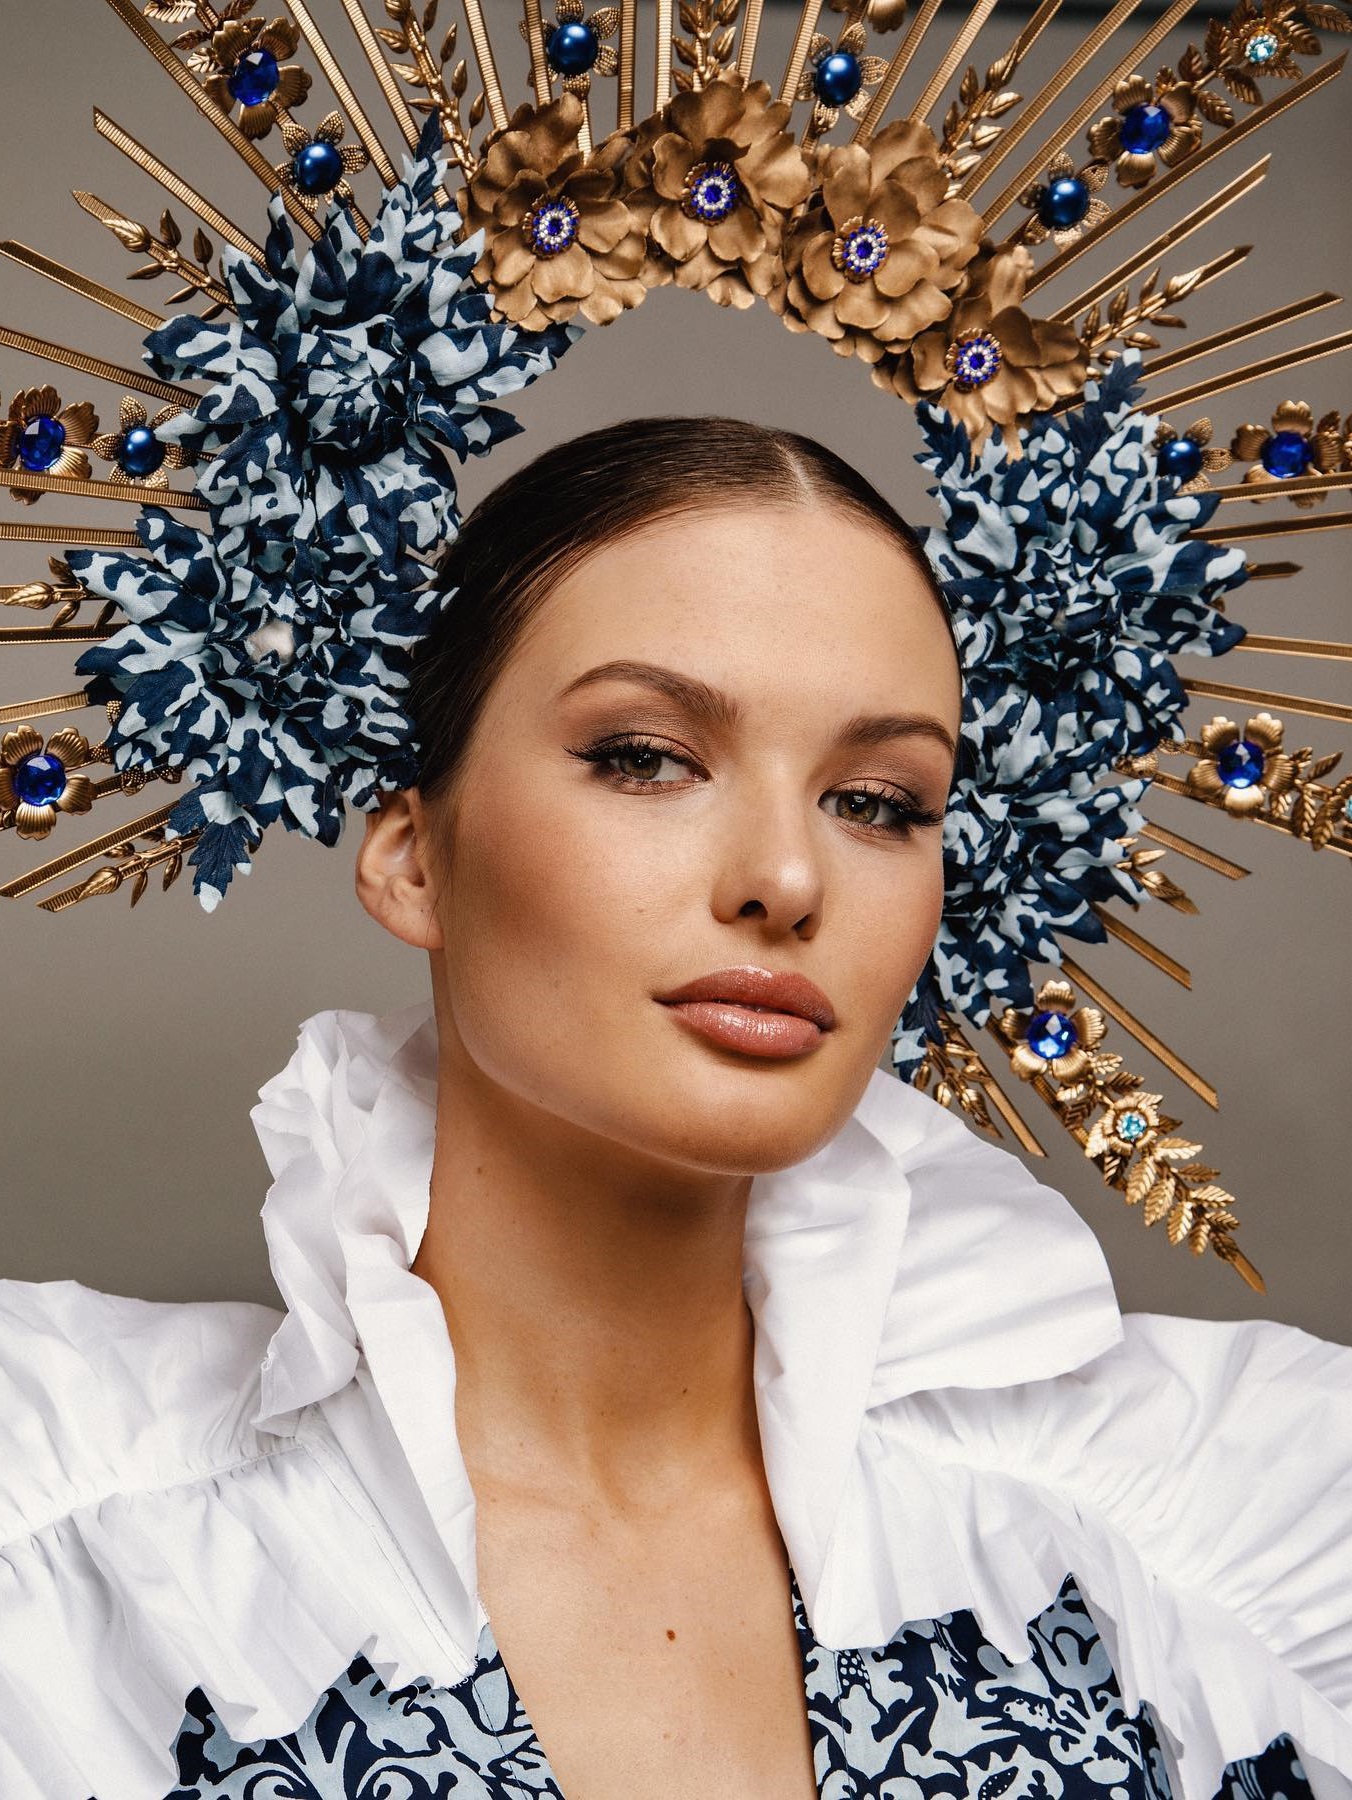 Czech Republic's national costume for the 69th Miss Universe pageant